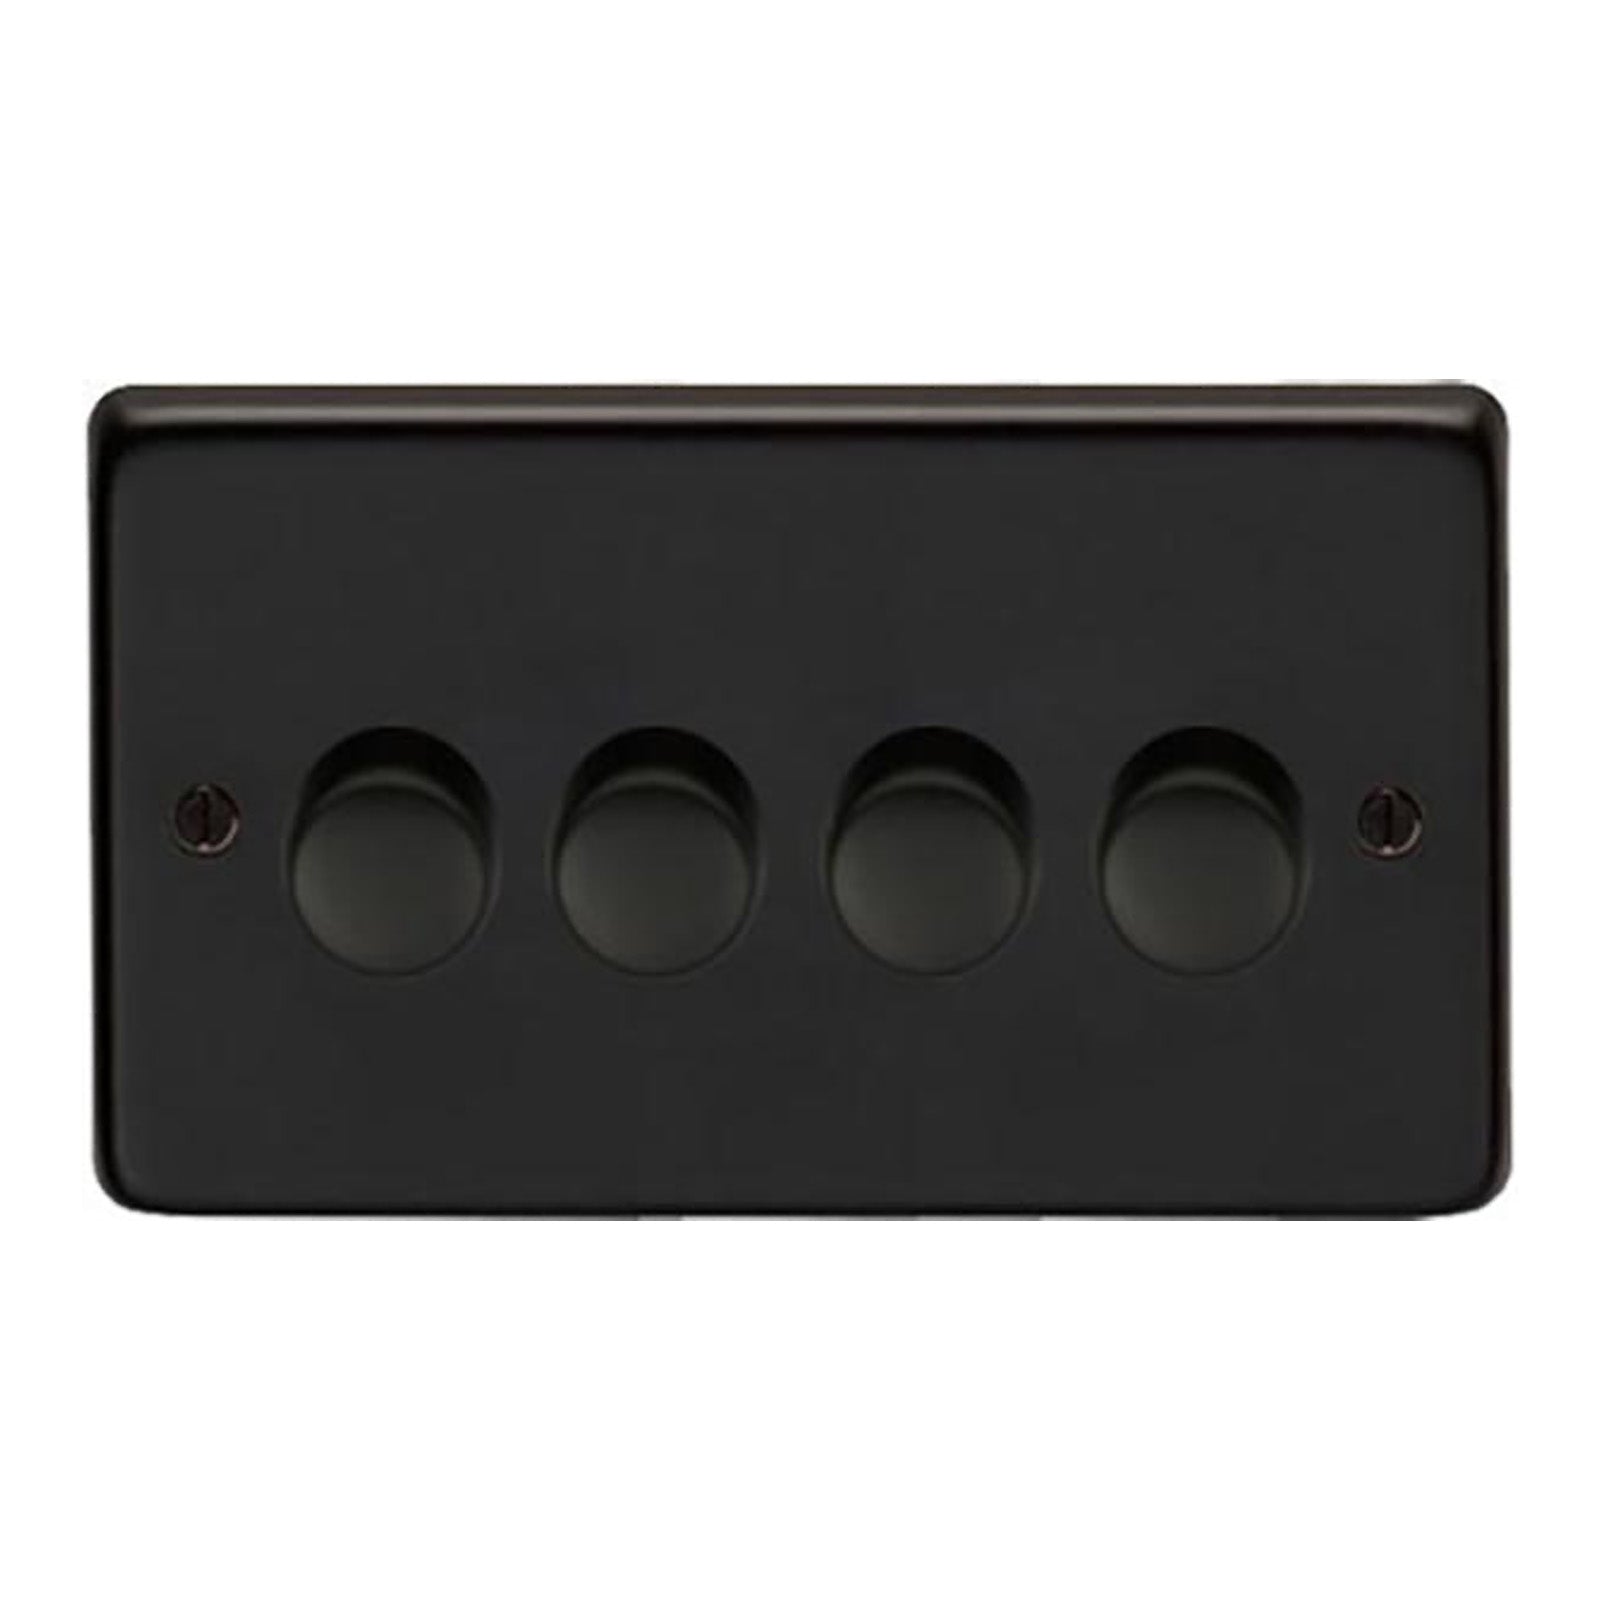 SHOW Image of Quad LED Dimmer Switch with Matt Black finish